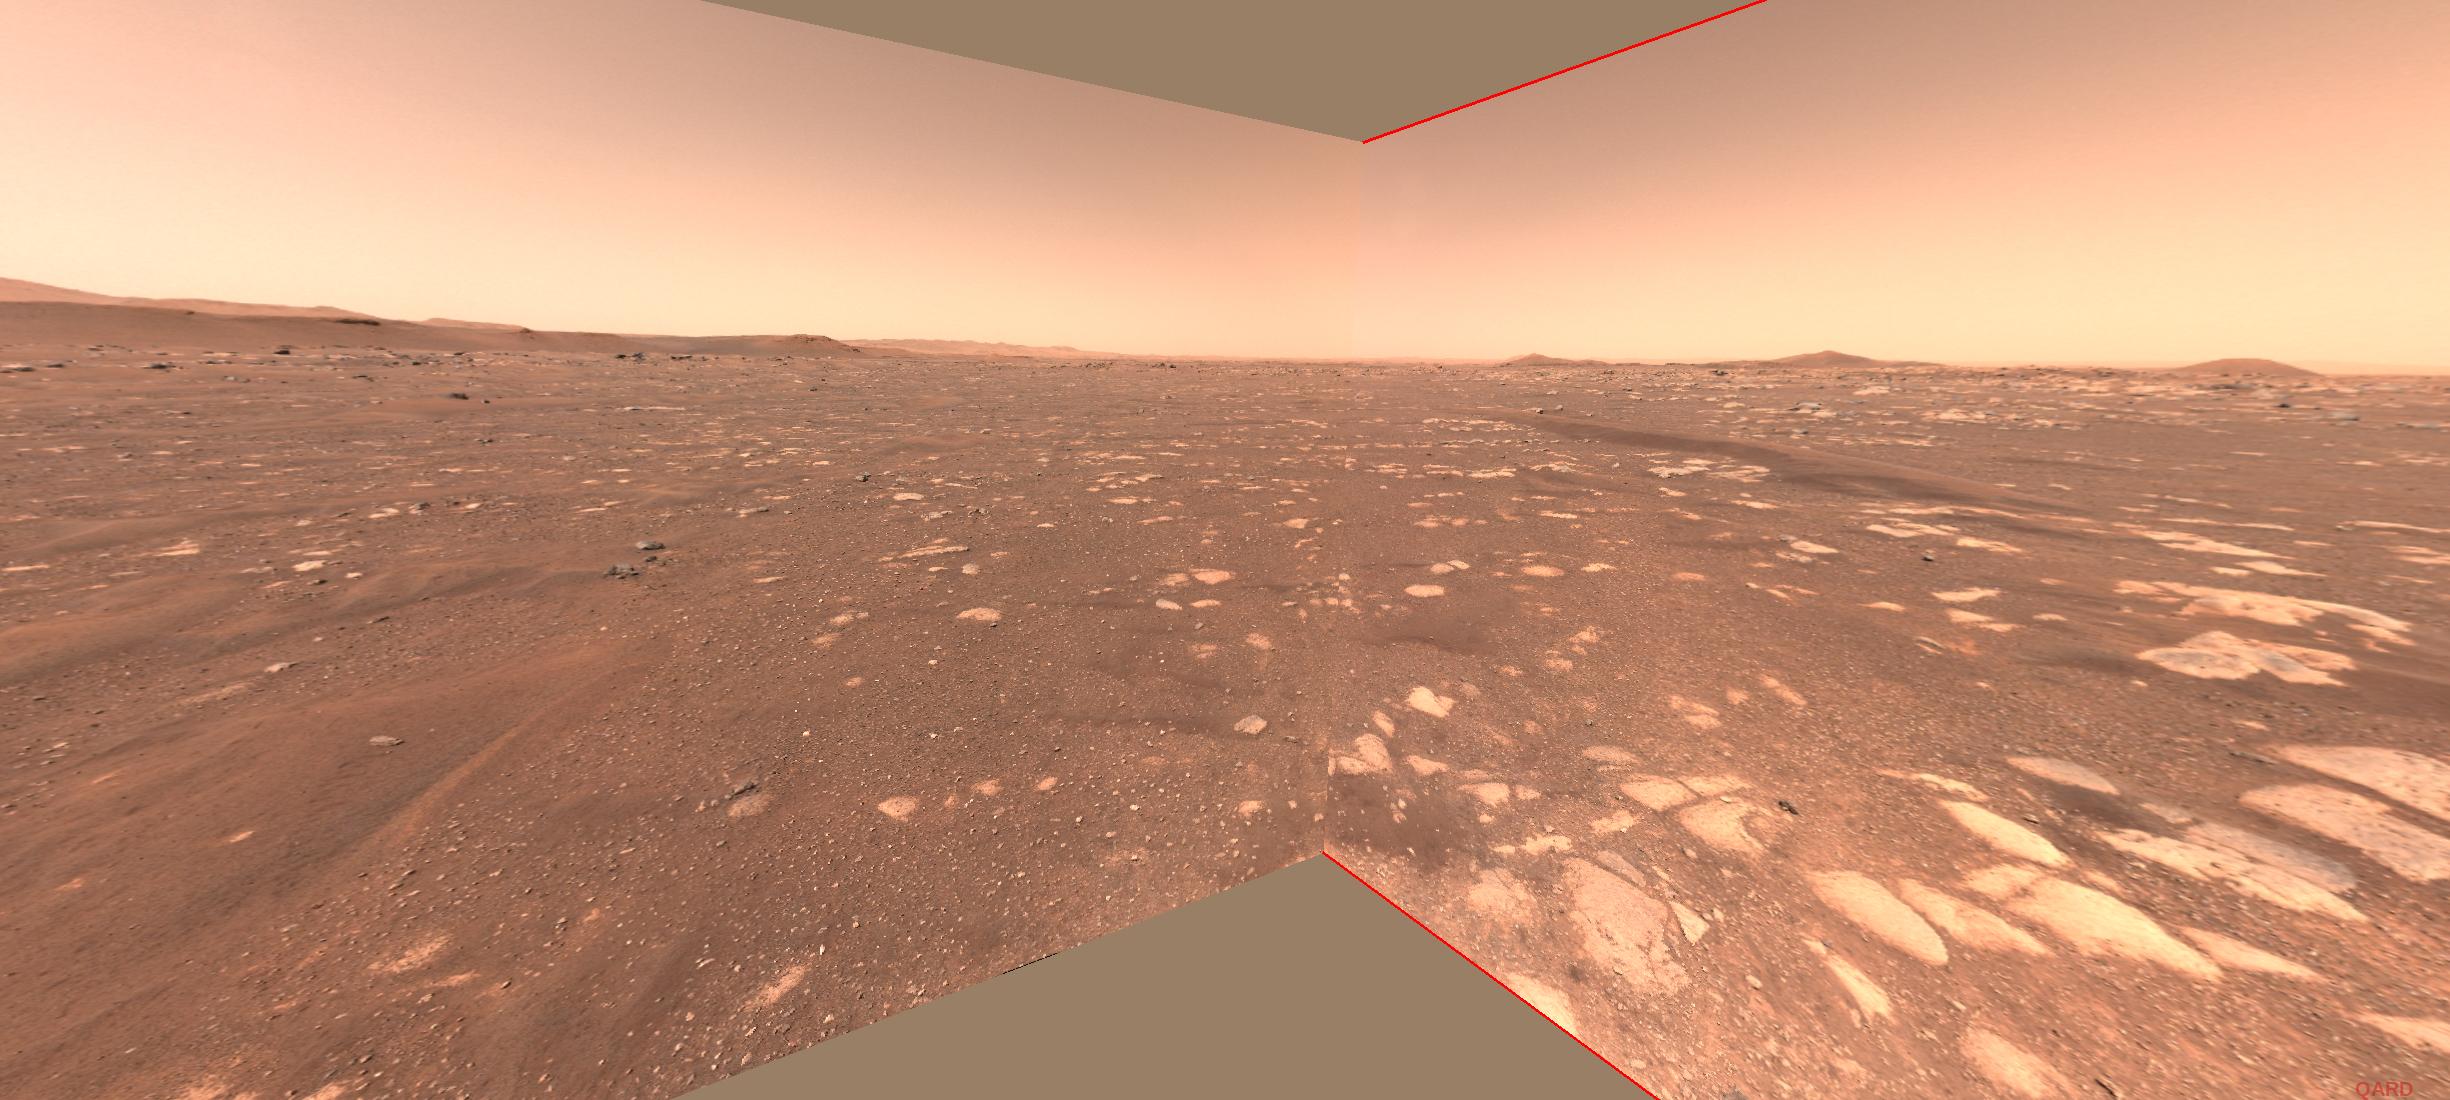 PIA24495: Rover Point of View of Ingenuity Flight Zone